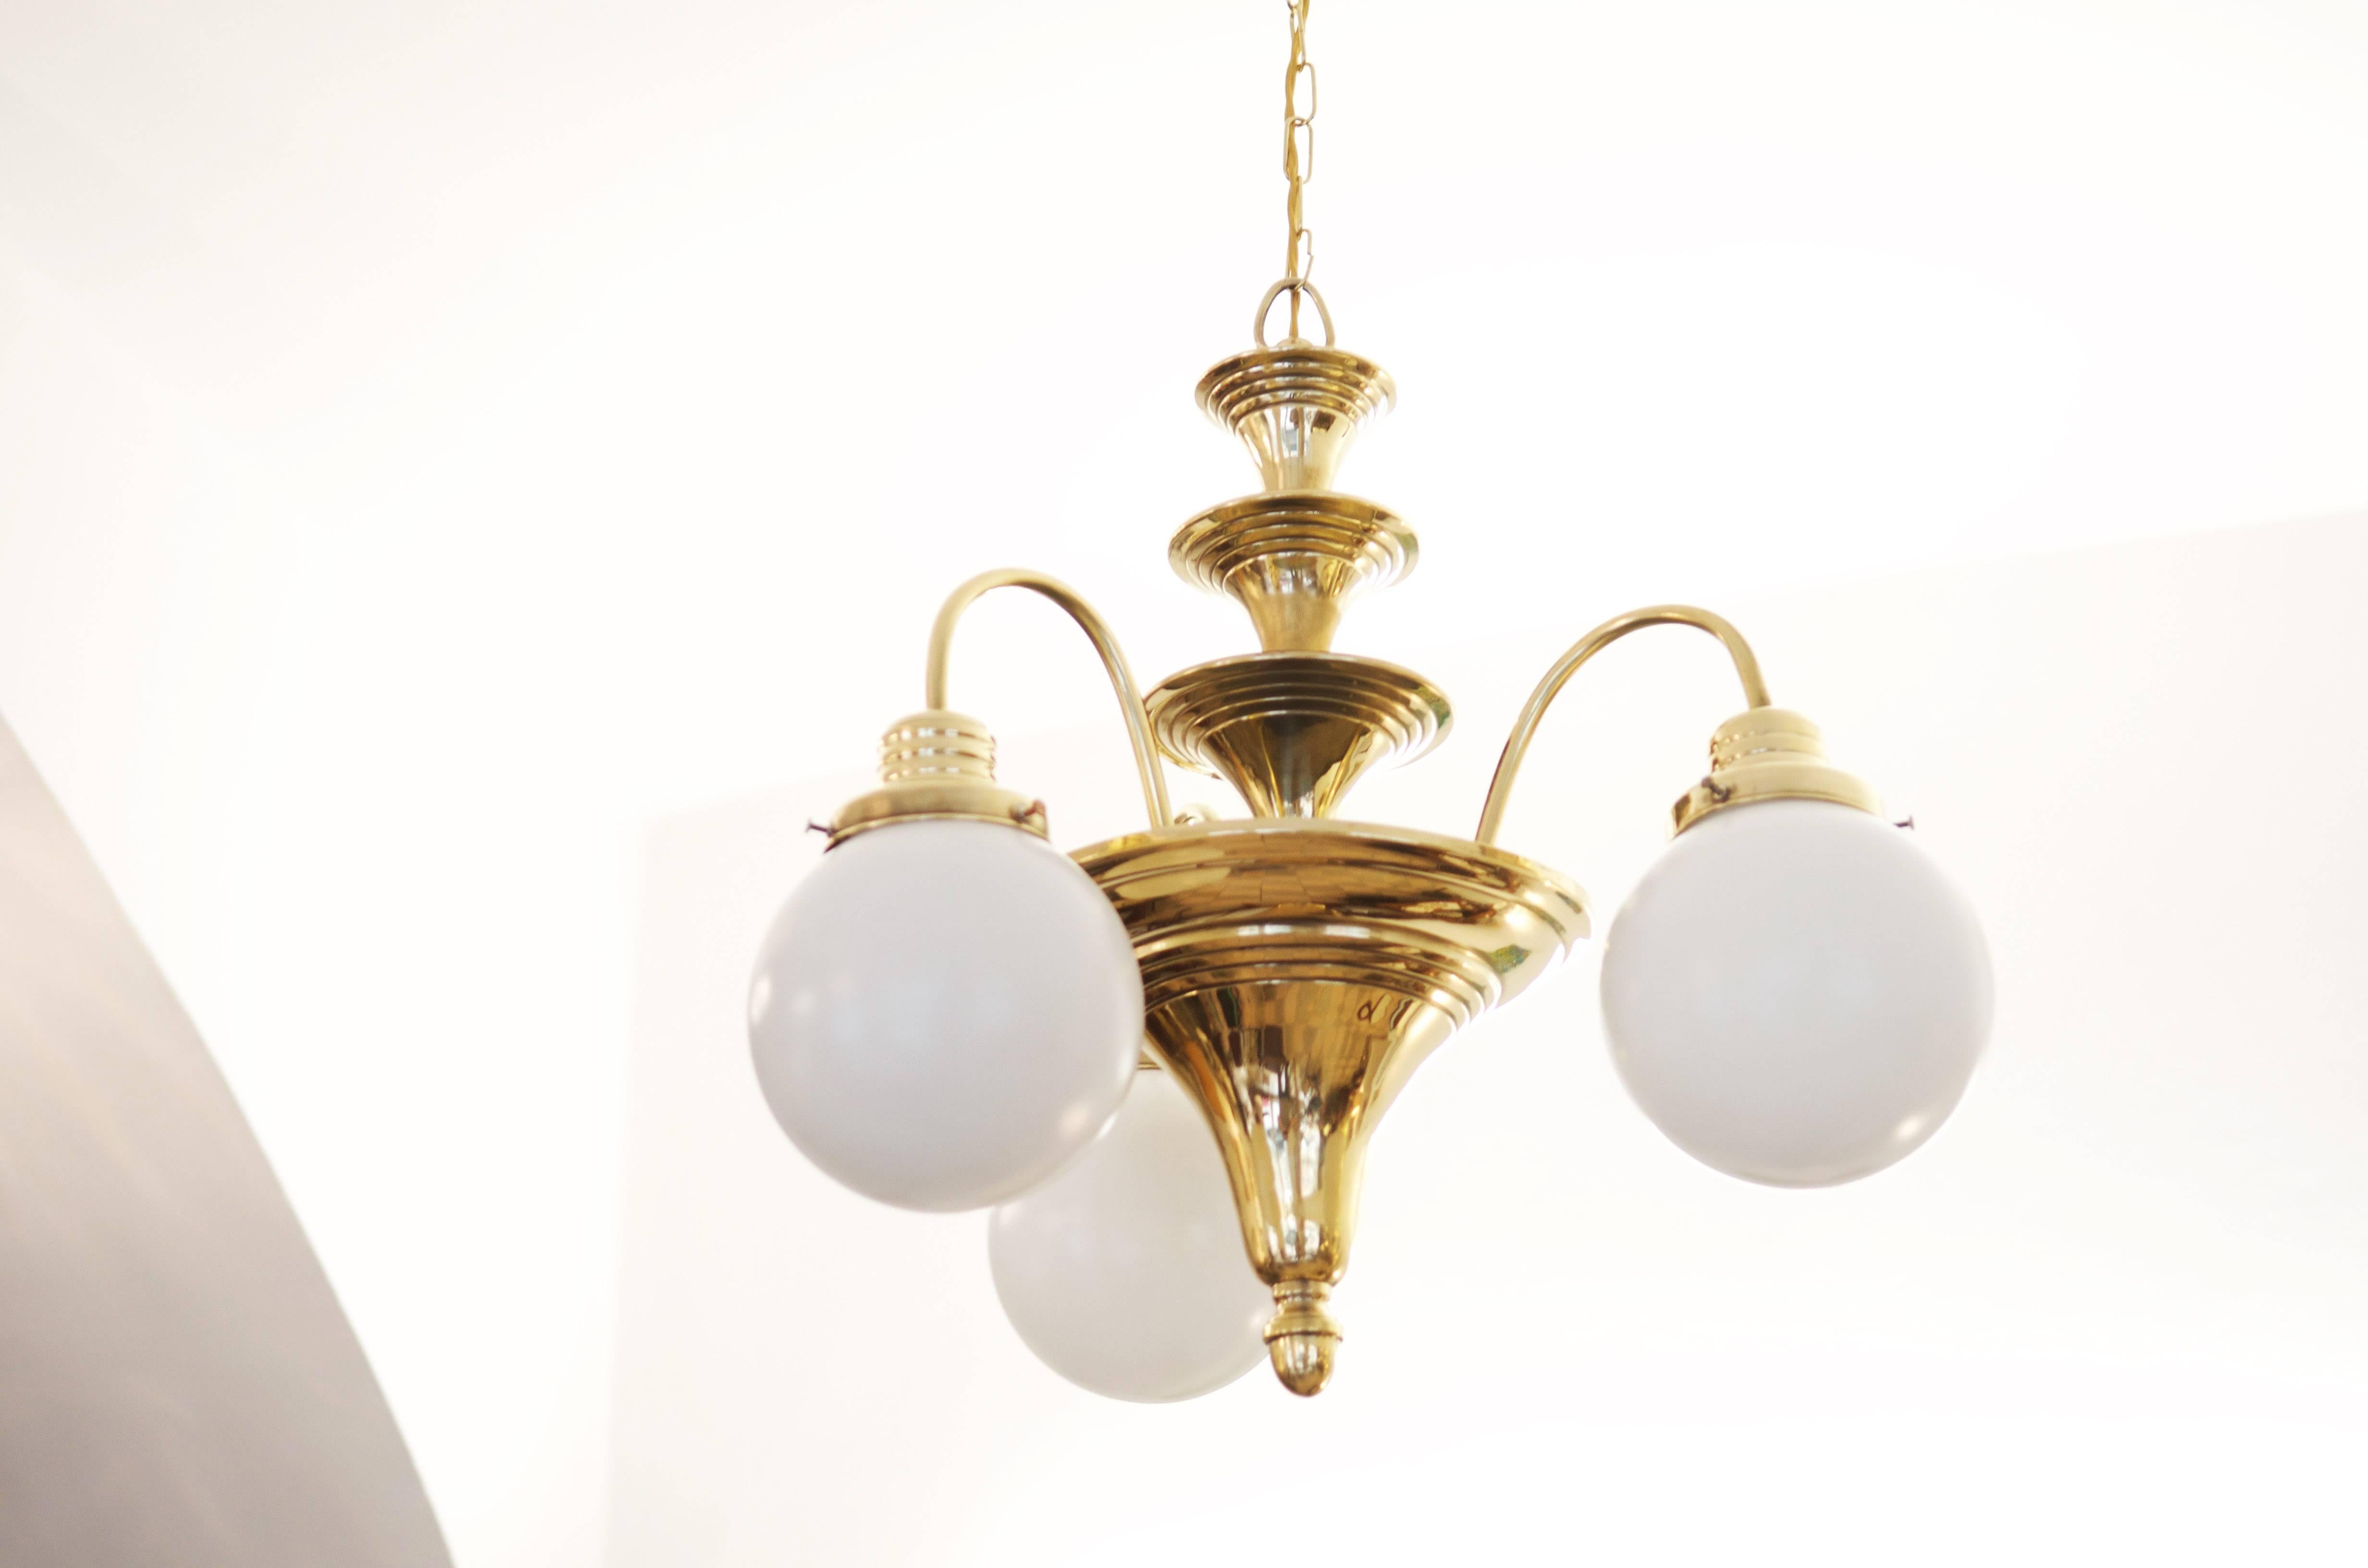 Brass construction with three opal glass ball shades.
Fully restored with E27 sockets.